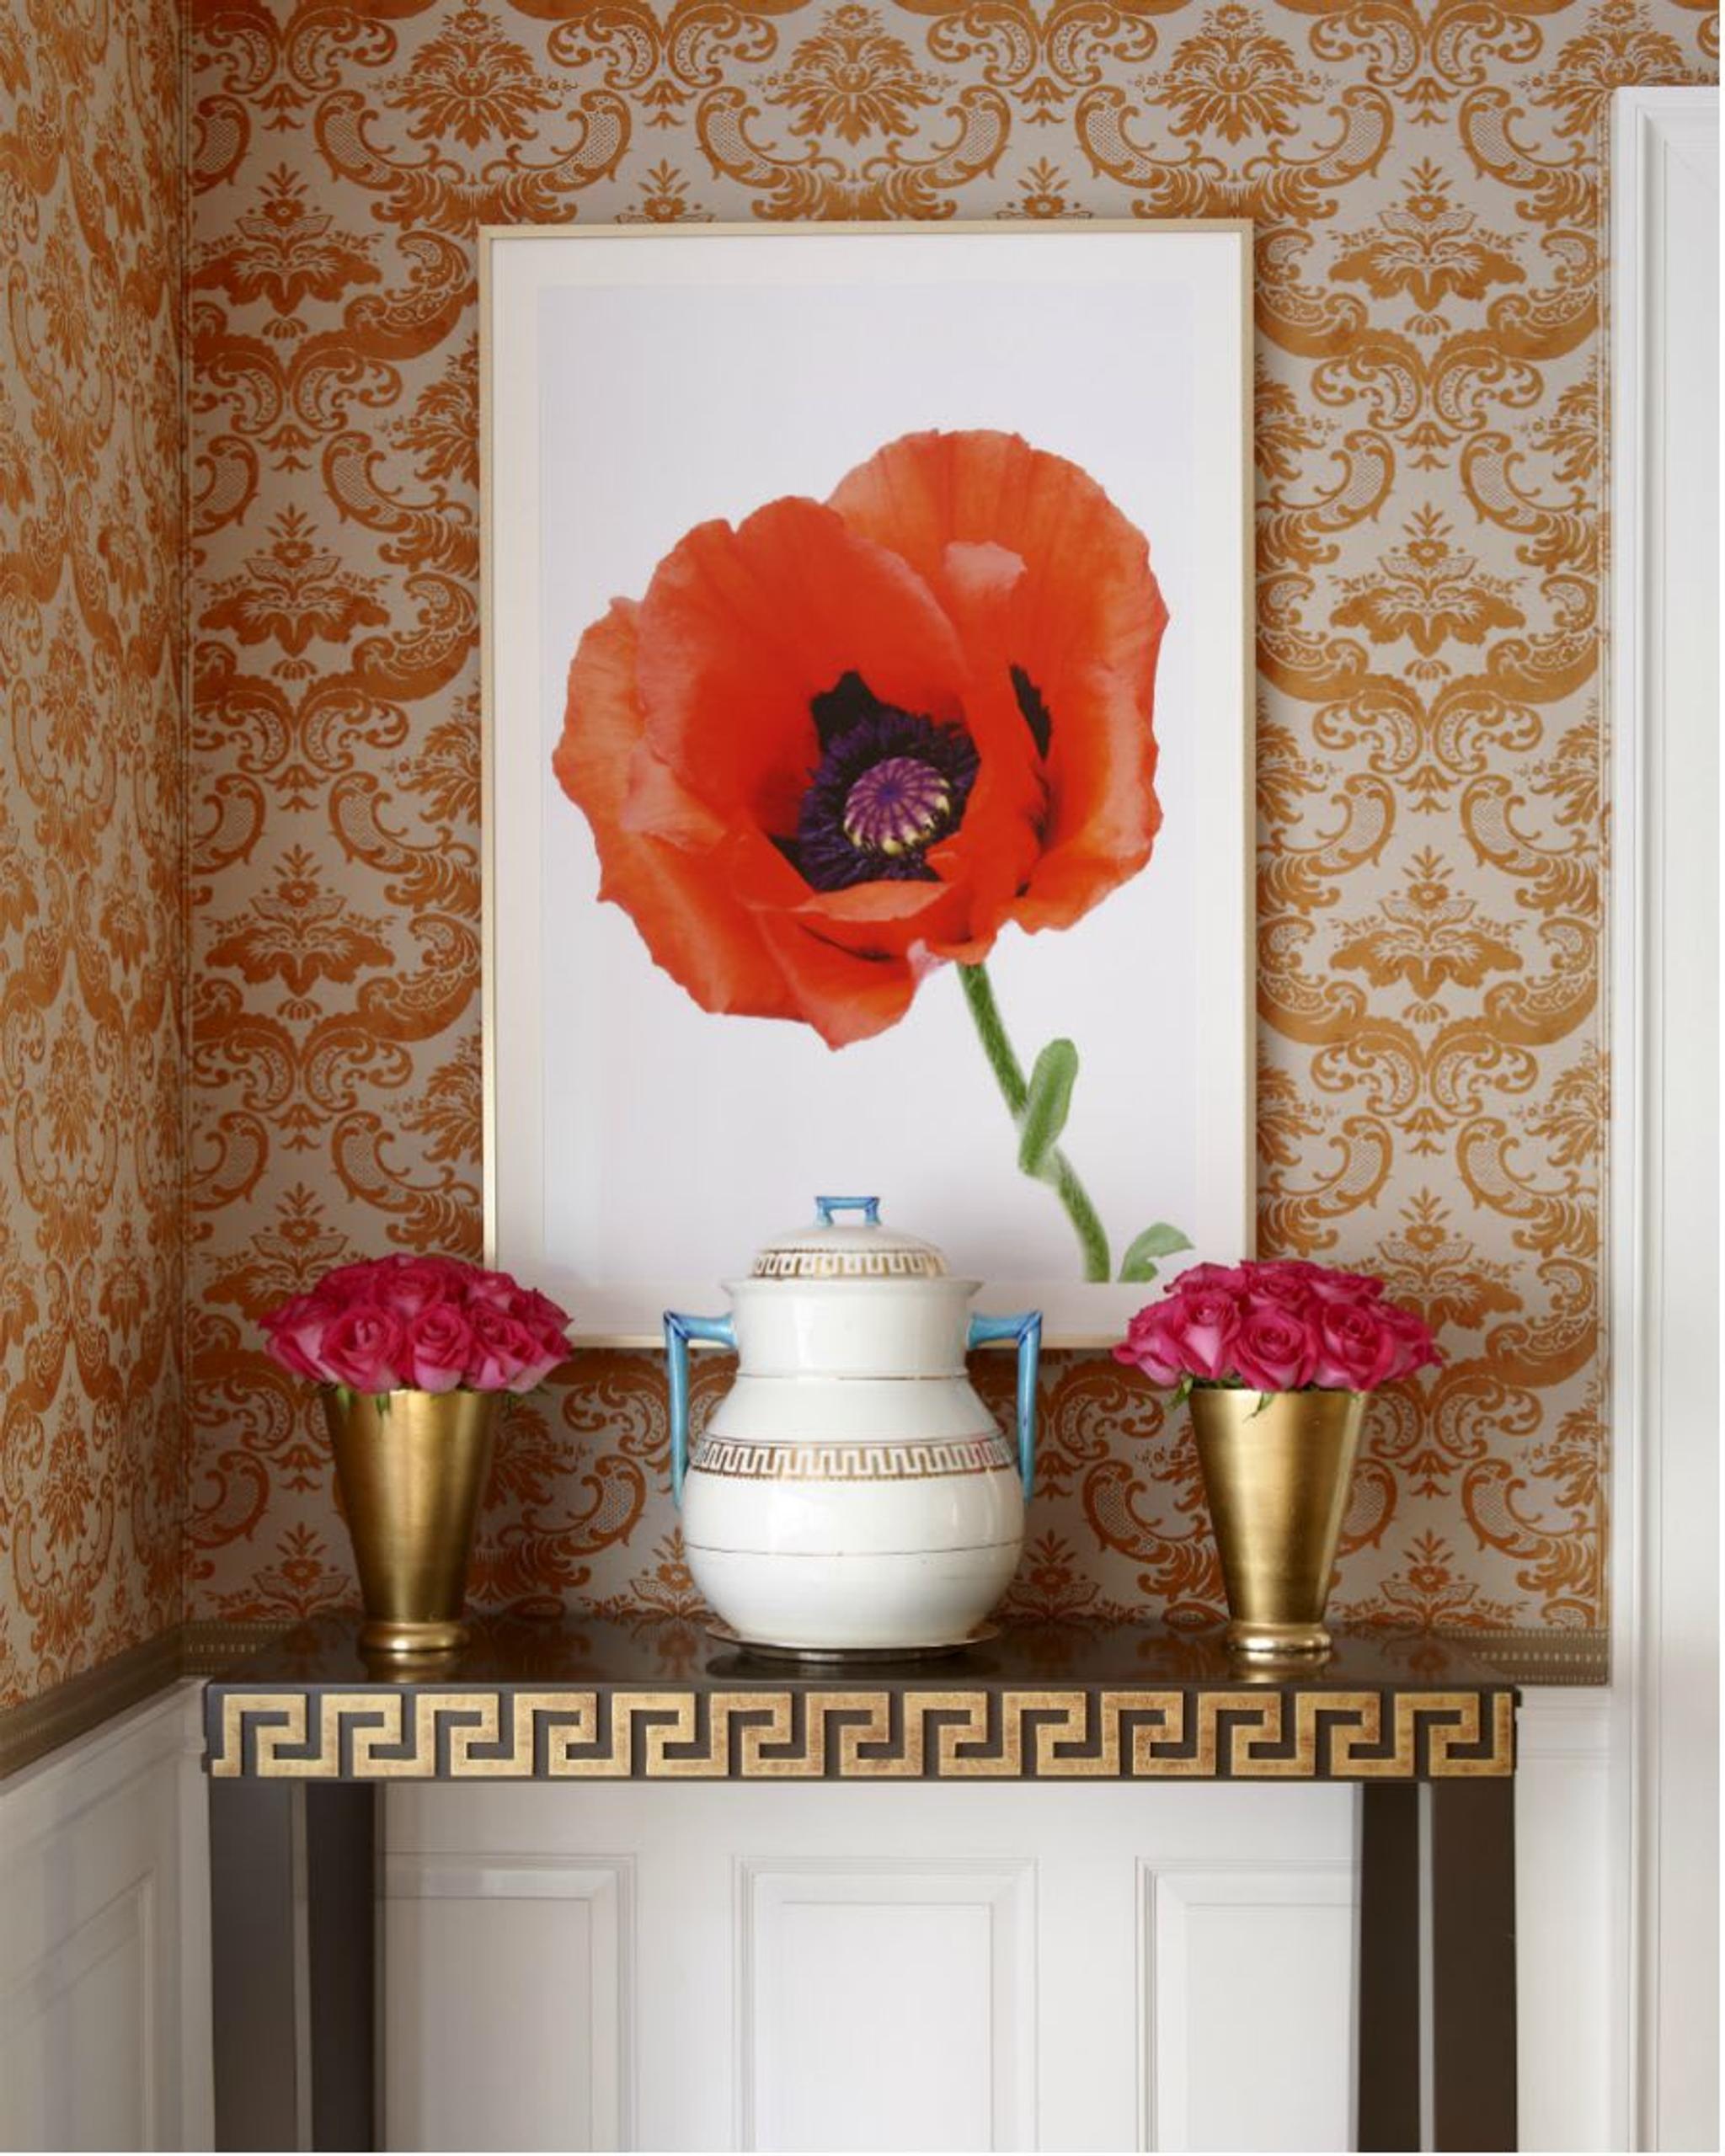 A poppy paintings beautifully layered on the classic wallpaper on the tones of a warm orange.